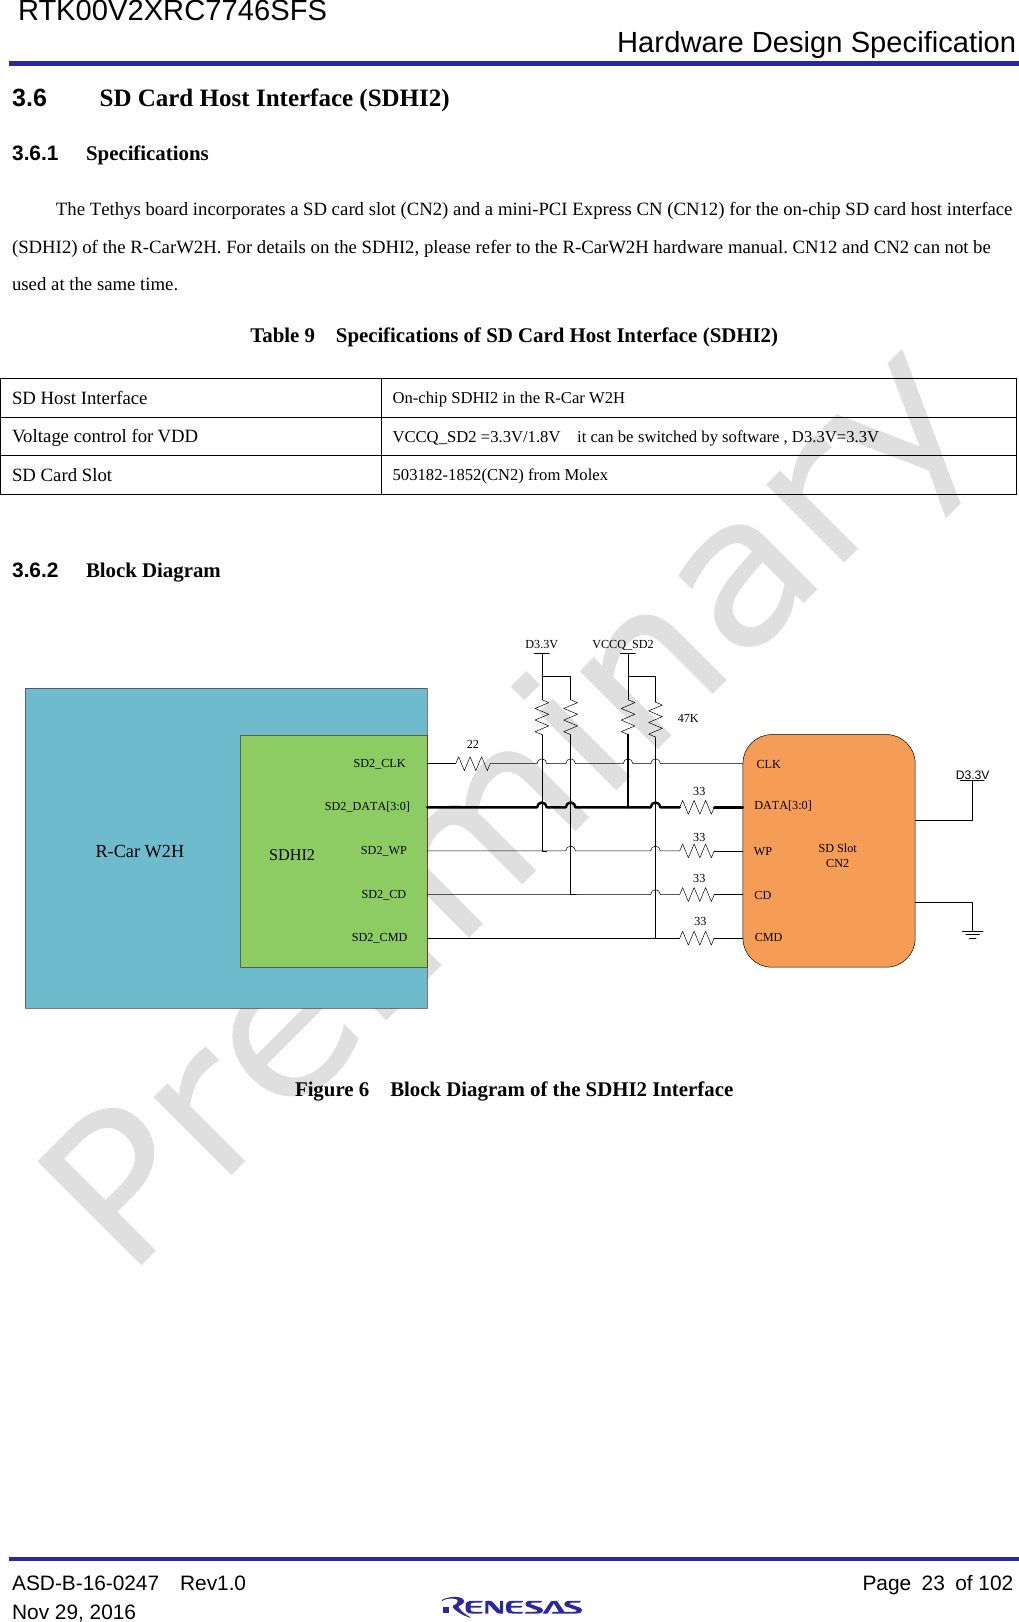  Hardware Design Specification ASD-B-16-0247  Rev1.0    Page  23 of 102 Nov 29, 2016     RTK00V2XRC7746SFS 3.6  SD Card Host Interface (SDHI2) 3.6.1 Specifications The Tethys board incorporates a SD card slot (CN2) and a mini-PCI Express CN (CN12) for the on-chip SD card host interface (SDHI2) of the R-CarW2H. For details on the SDHI2, please refer to the R-CarW2H hardware manual. CN12 and CN2 can not be used at the same time. Table 9  Specifications of SD Card Host Interface (SDHI2) SD Host Interface On-chip SDHI2 in the R-Car W2H Voltage control for VDD VCCQ_SD2 =3.3V/1.8V    it can be switched by software , D3.3V=3.3V SD Card Slot 503182-1852(CN2) from Molex  3.6.2 Block Diagram R-Car W2H SDHI2SD2_CLKSD2_DATA[3:0]SD2_CDSD2_WPSD2_CMDVCCQ_SD247K2233333333CLKDATA[3:0]WPCDCMDSD SlotCN2D3.3VD3.3V Figure 6  Block Diagram of the SDHI2 Interface           